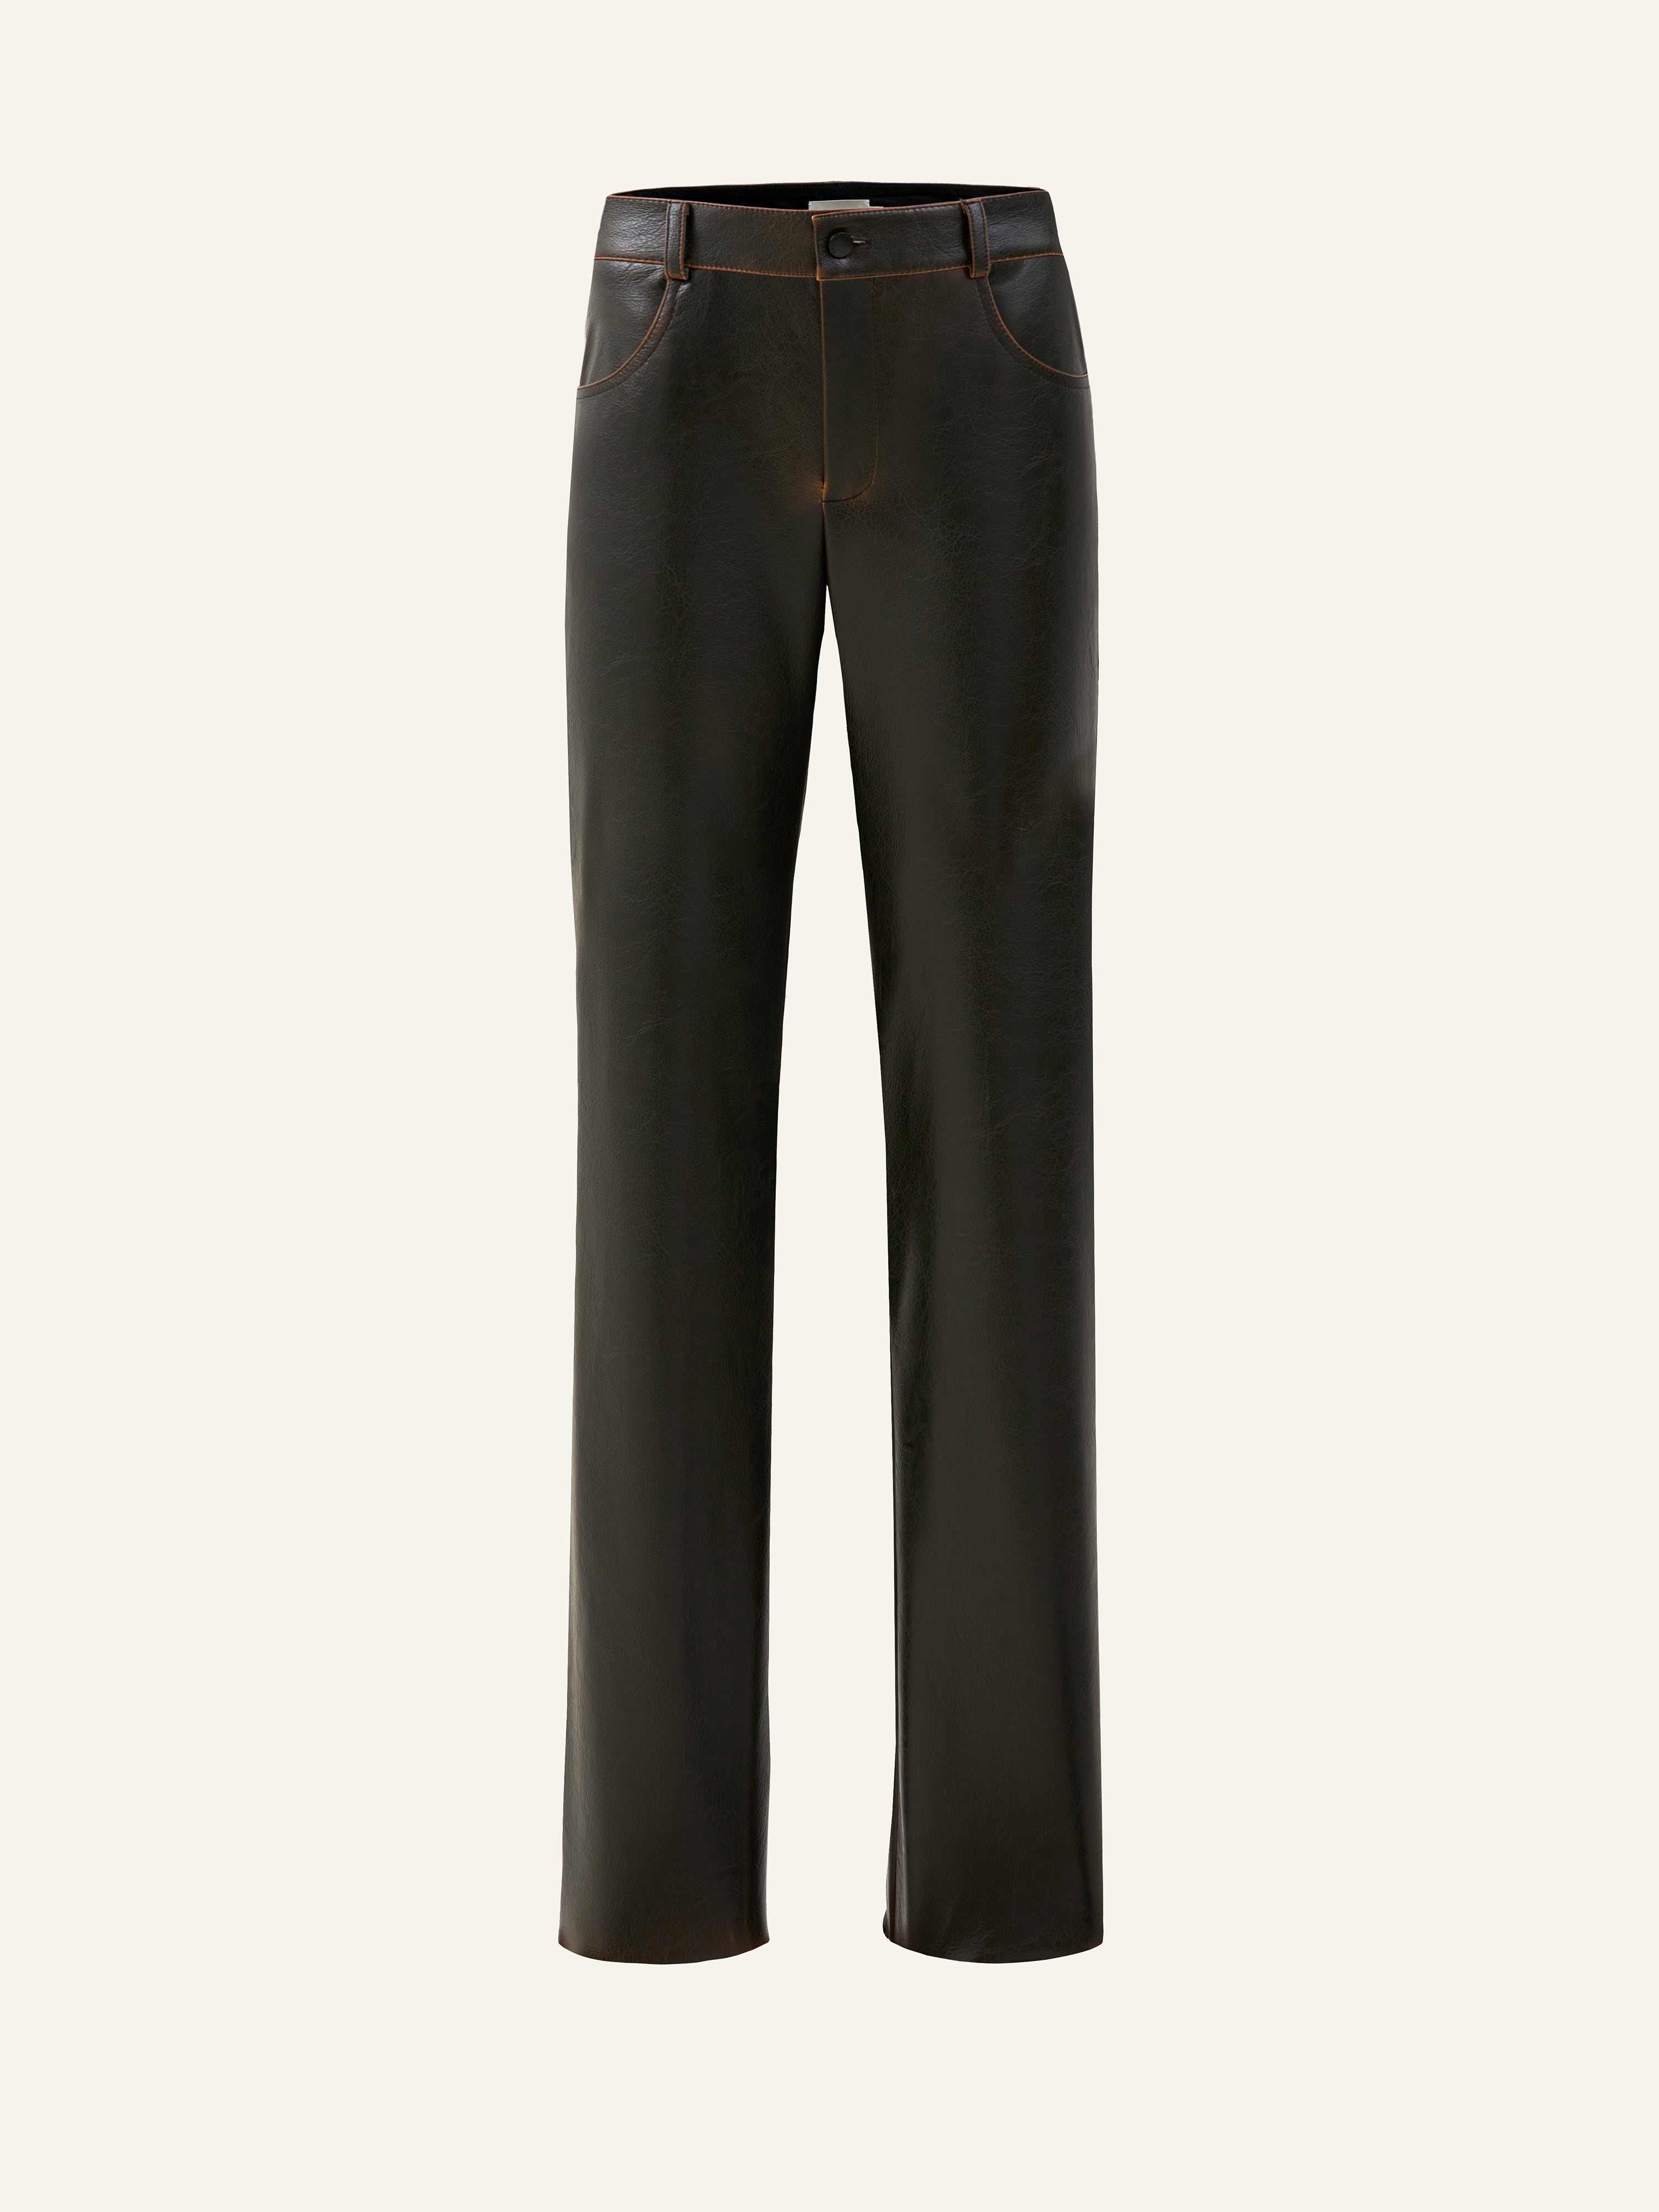 Product photo of brown vegan leather pants with mid rise